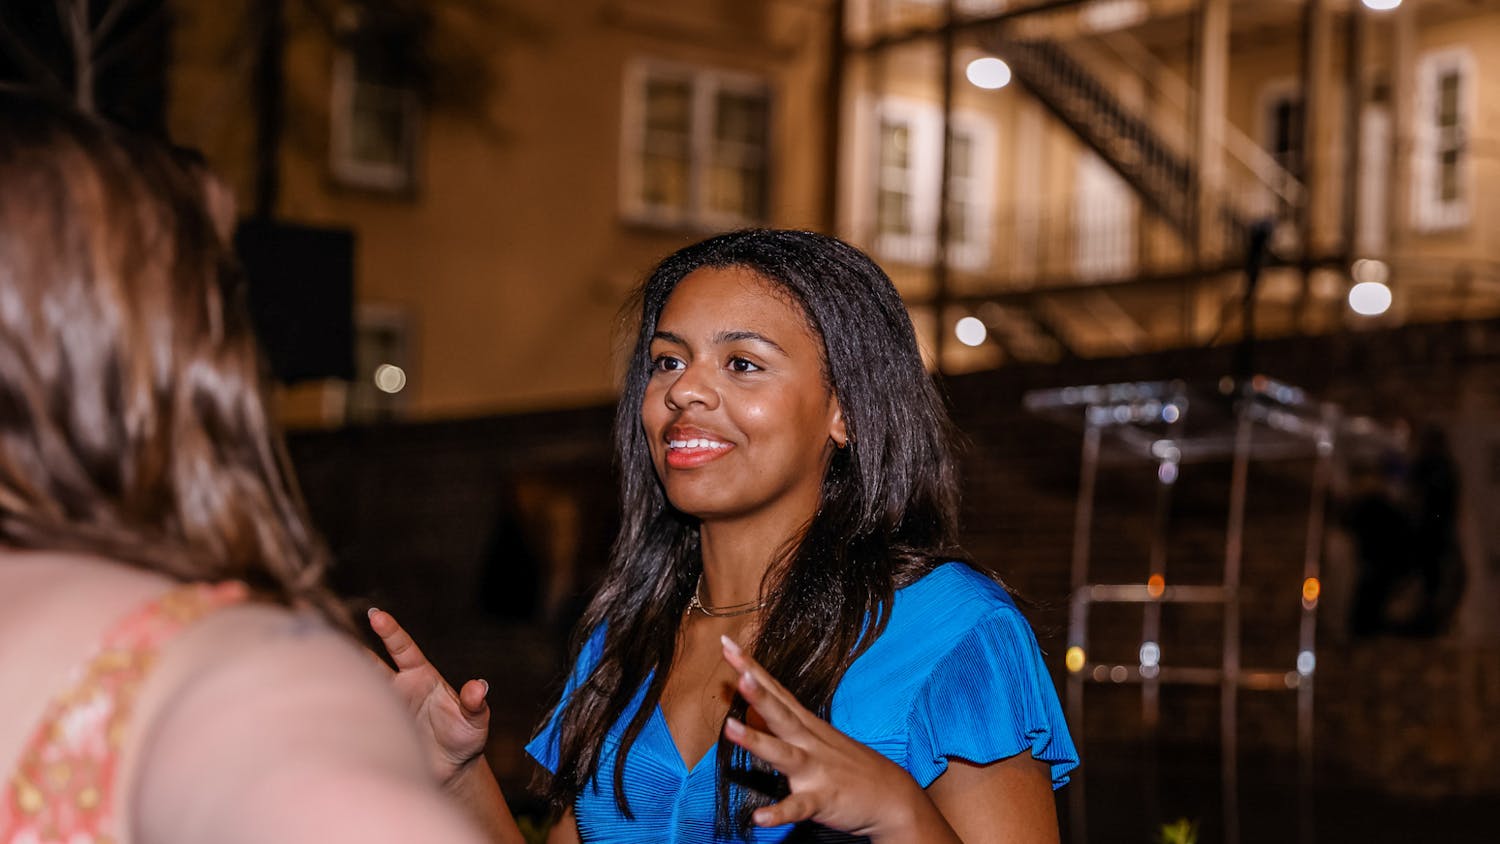 Second-year finance and marketing student Abrianna Reaves speaks to the media on Greene Street after winning the election for student body vice president on Feb. 22, 2023. Reaves ran alongside student body president-elect Emmie Thompson.